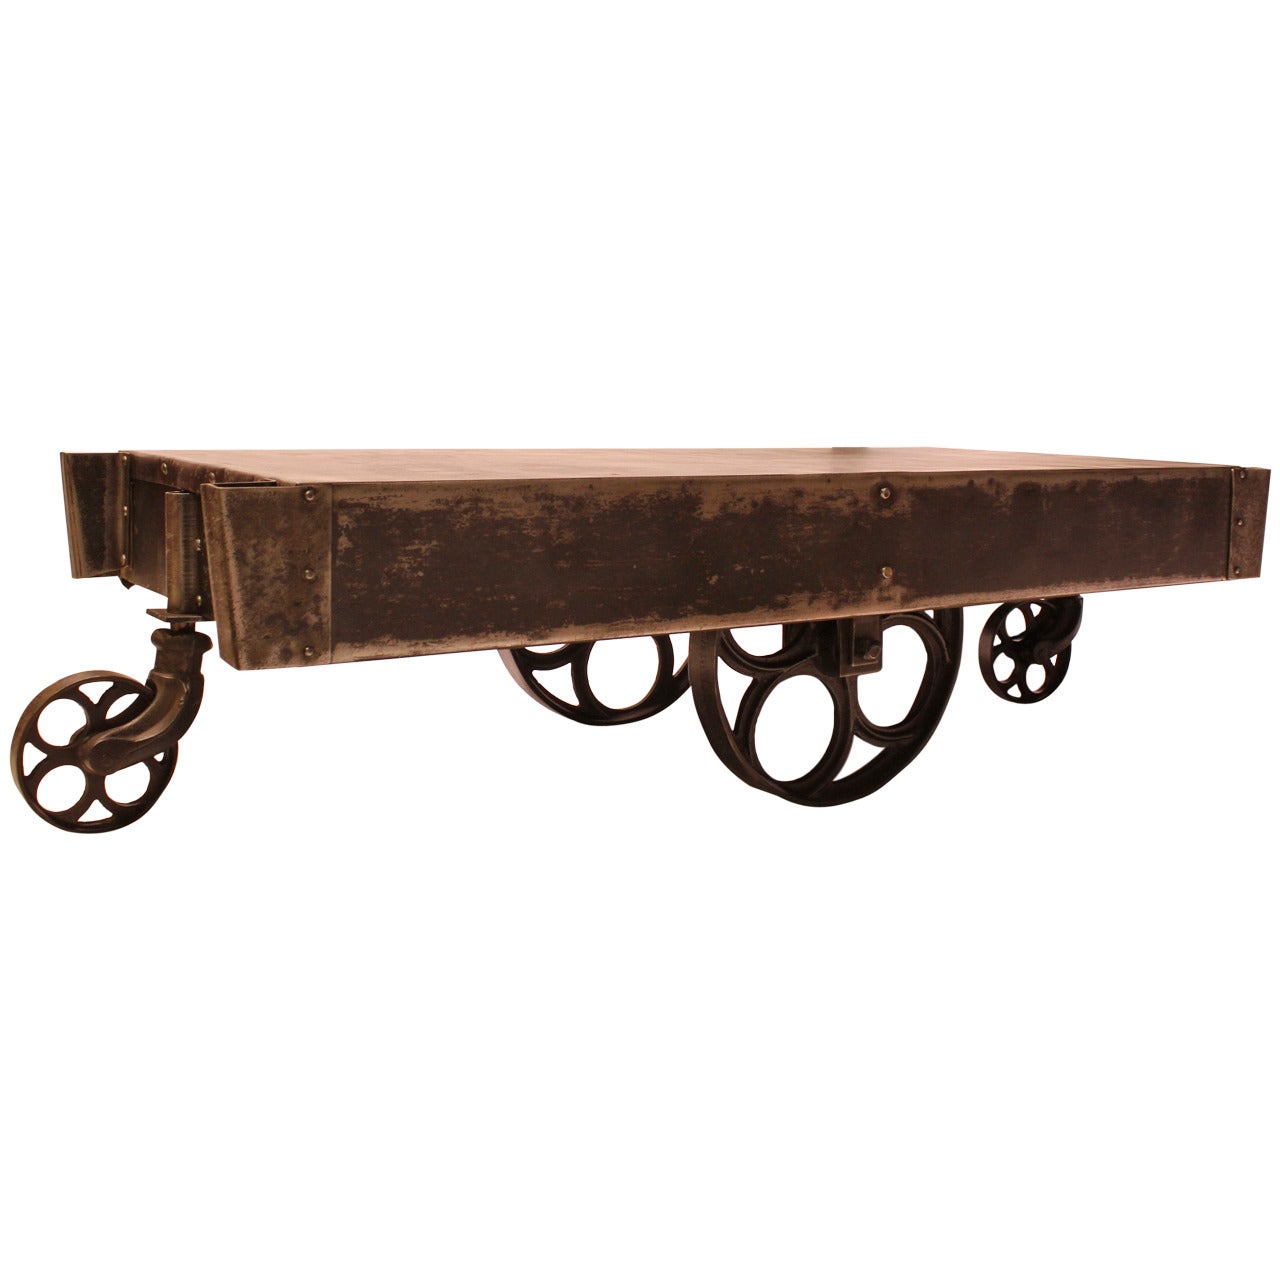 Stylish Antique American Industrial Steel Cart or Coffee Table For Sale